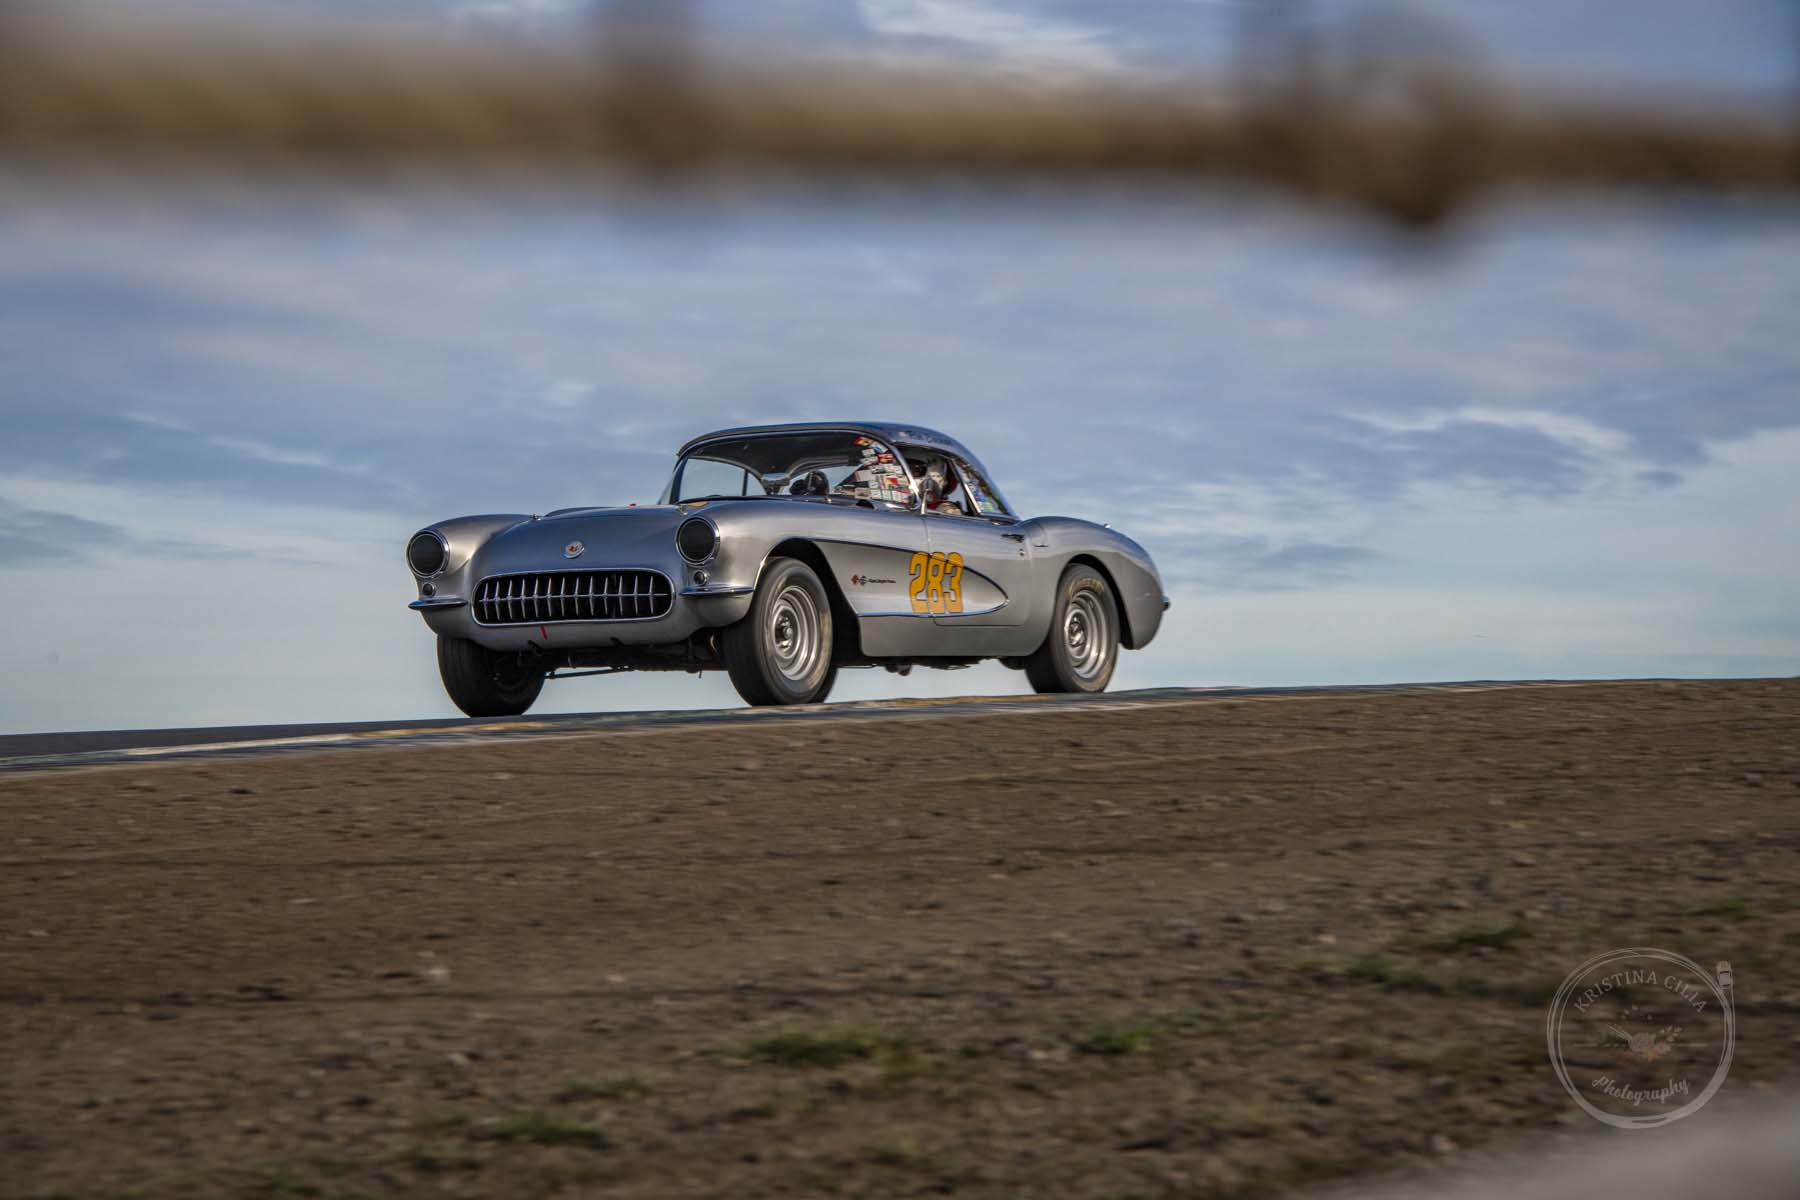 Ron Erickson crests the hill in a 1957 Chevrolet Corvette before going down  into Turn 4 at Sonoma Raceway